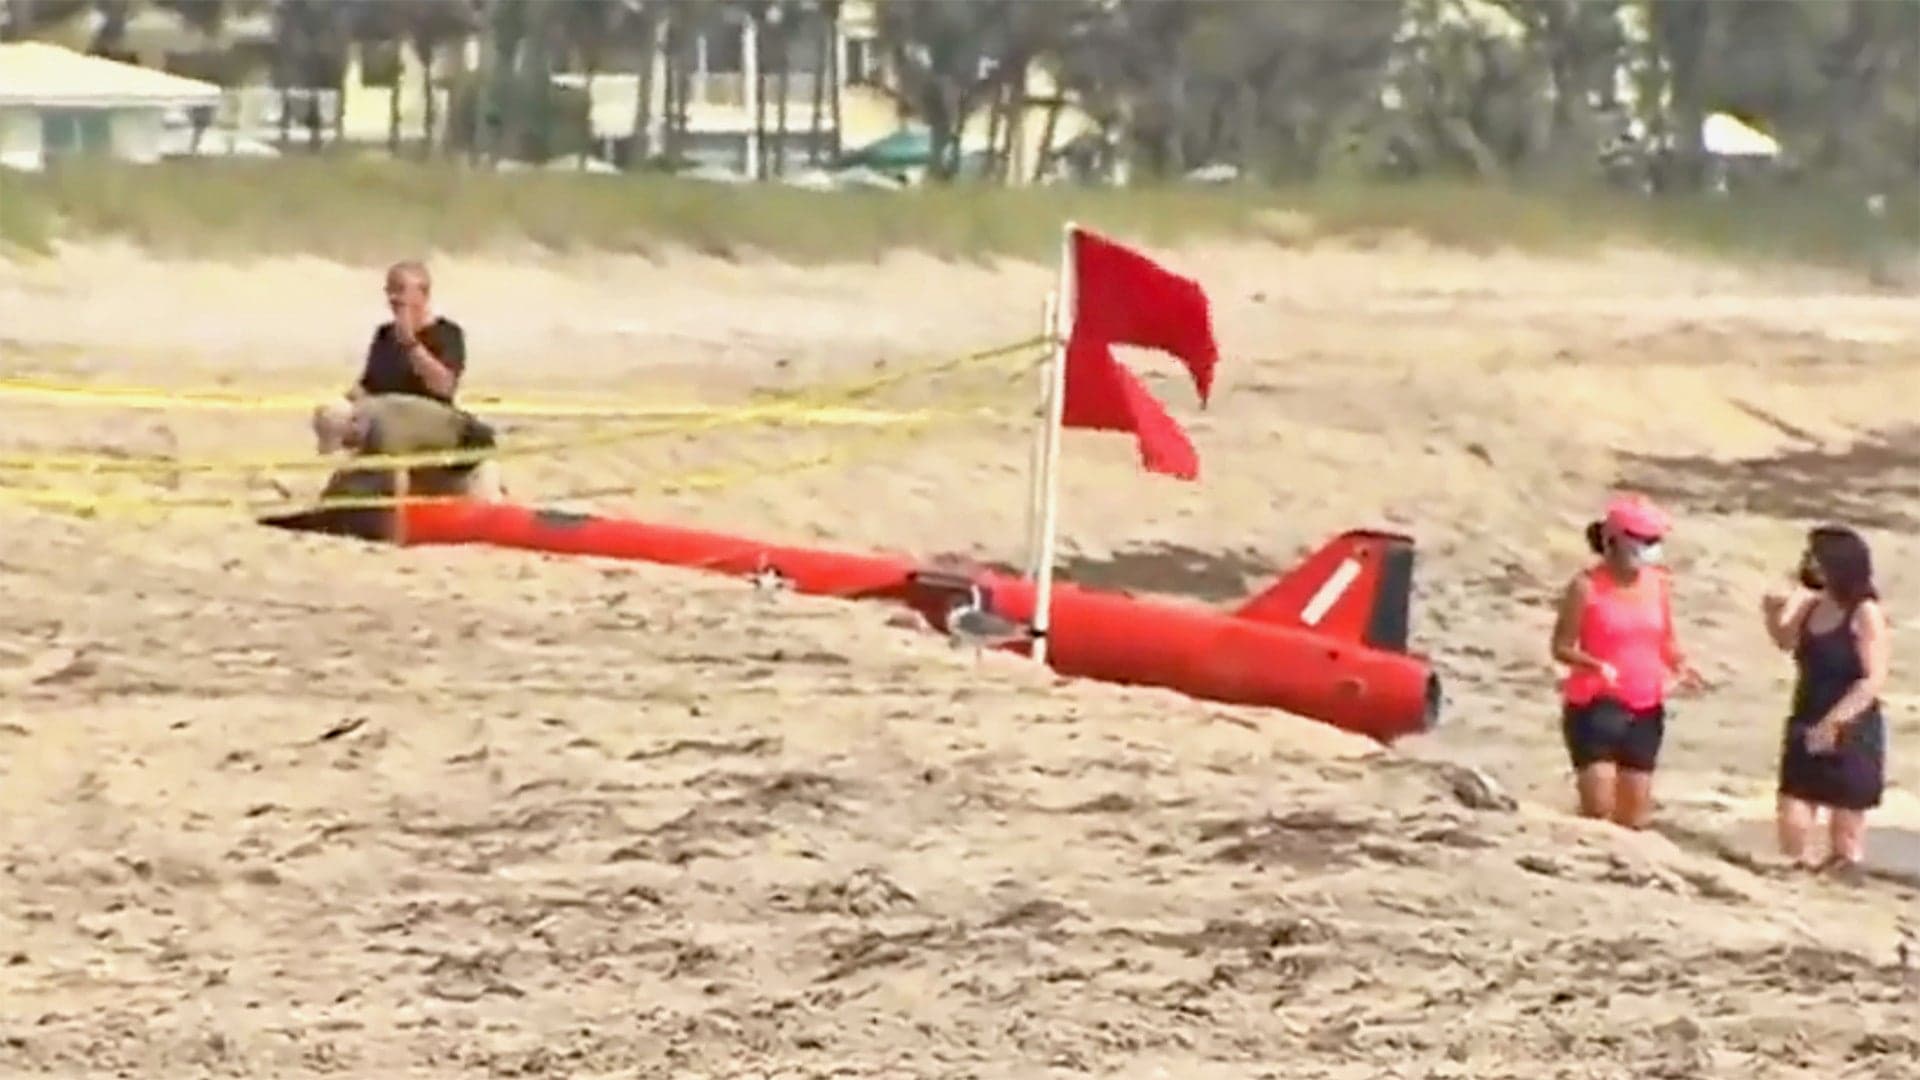 High-Performance Target Drone Washes Up On Florida Beach (Updated)